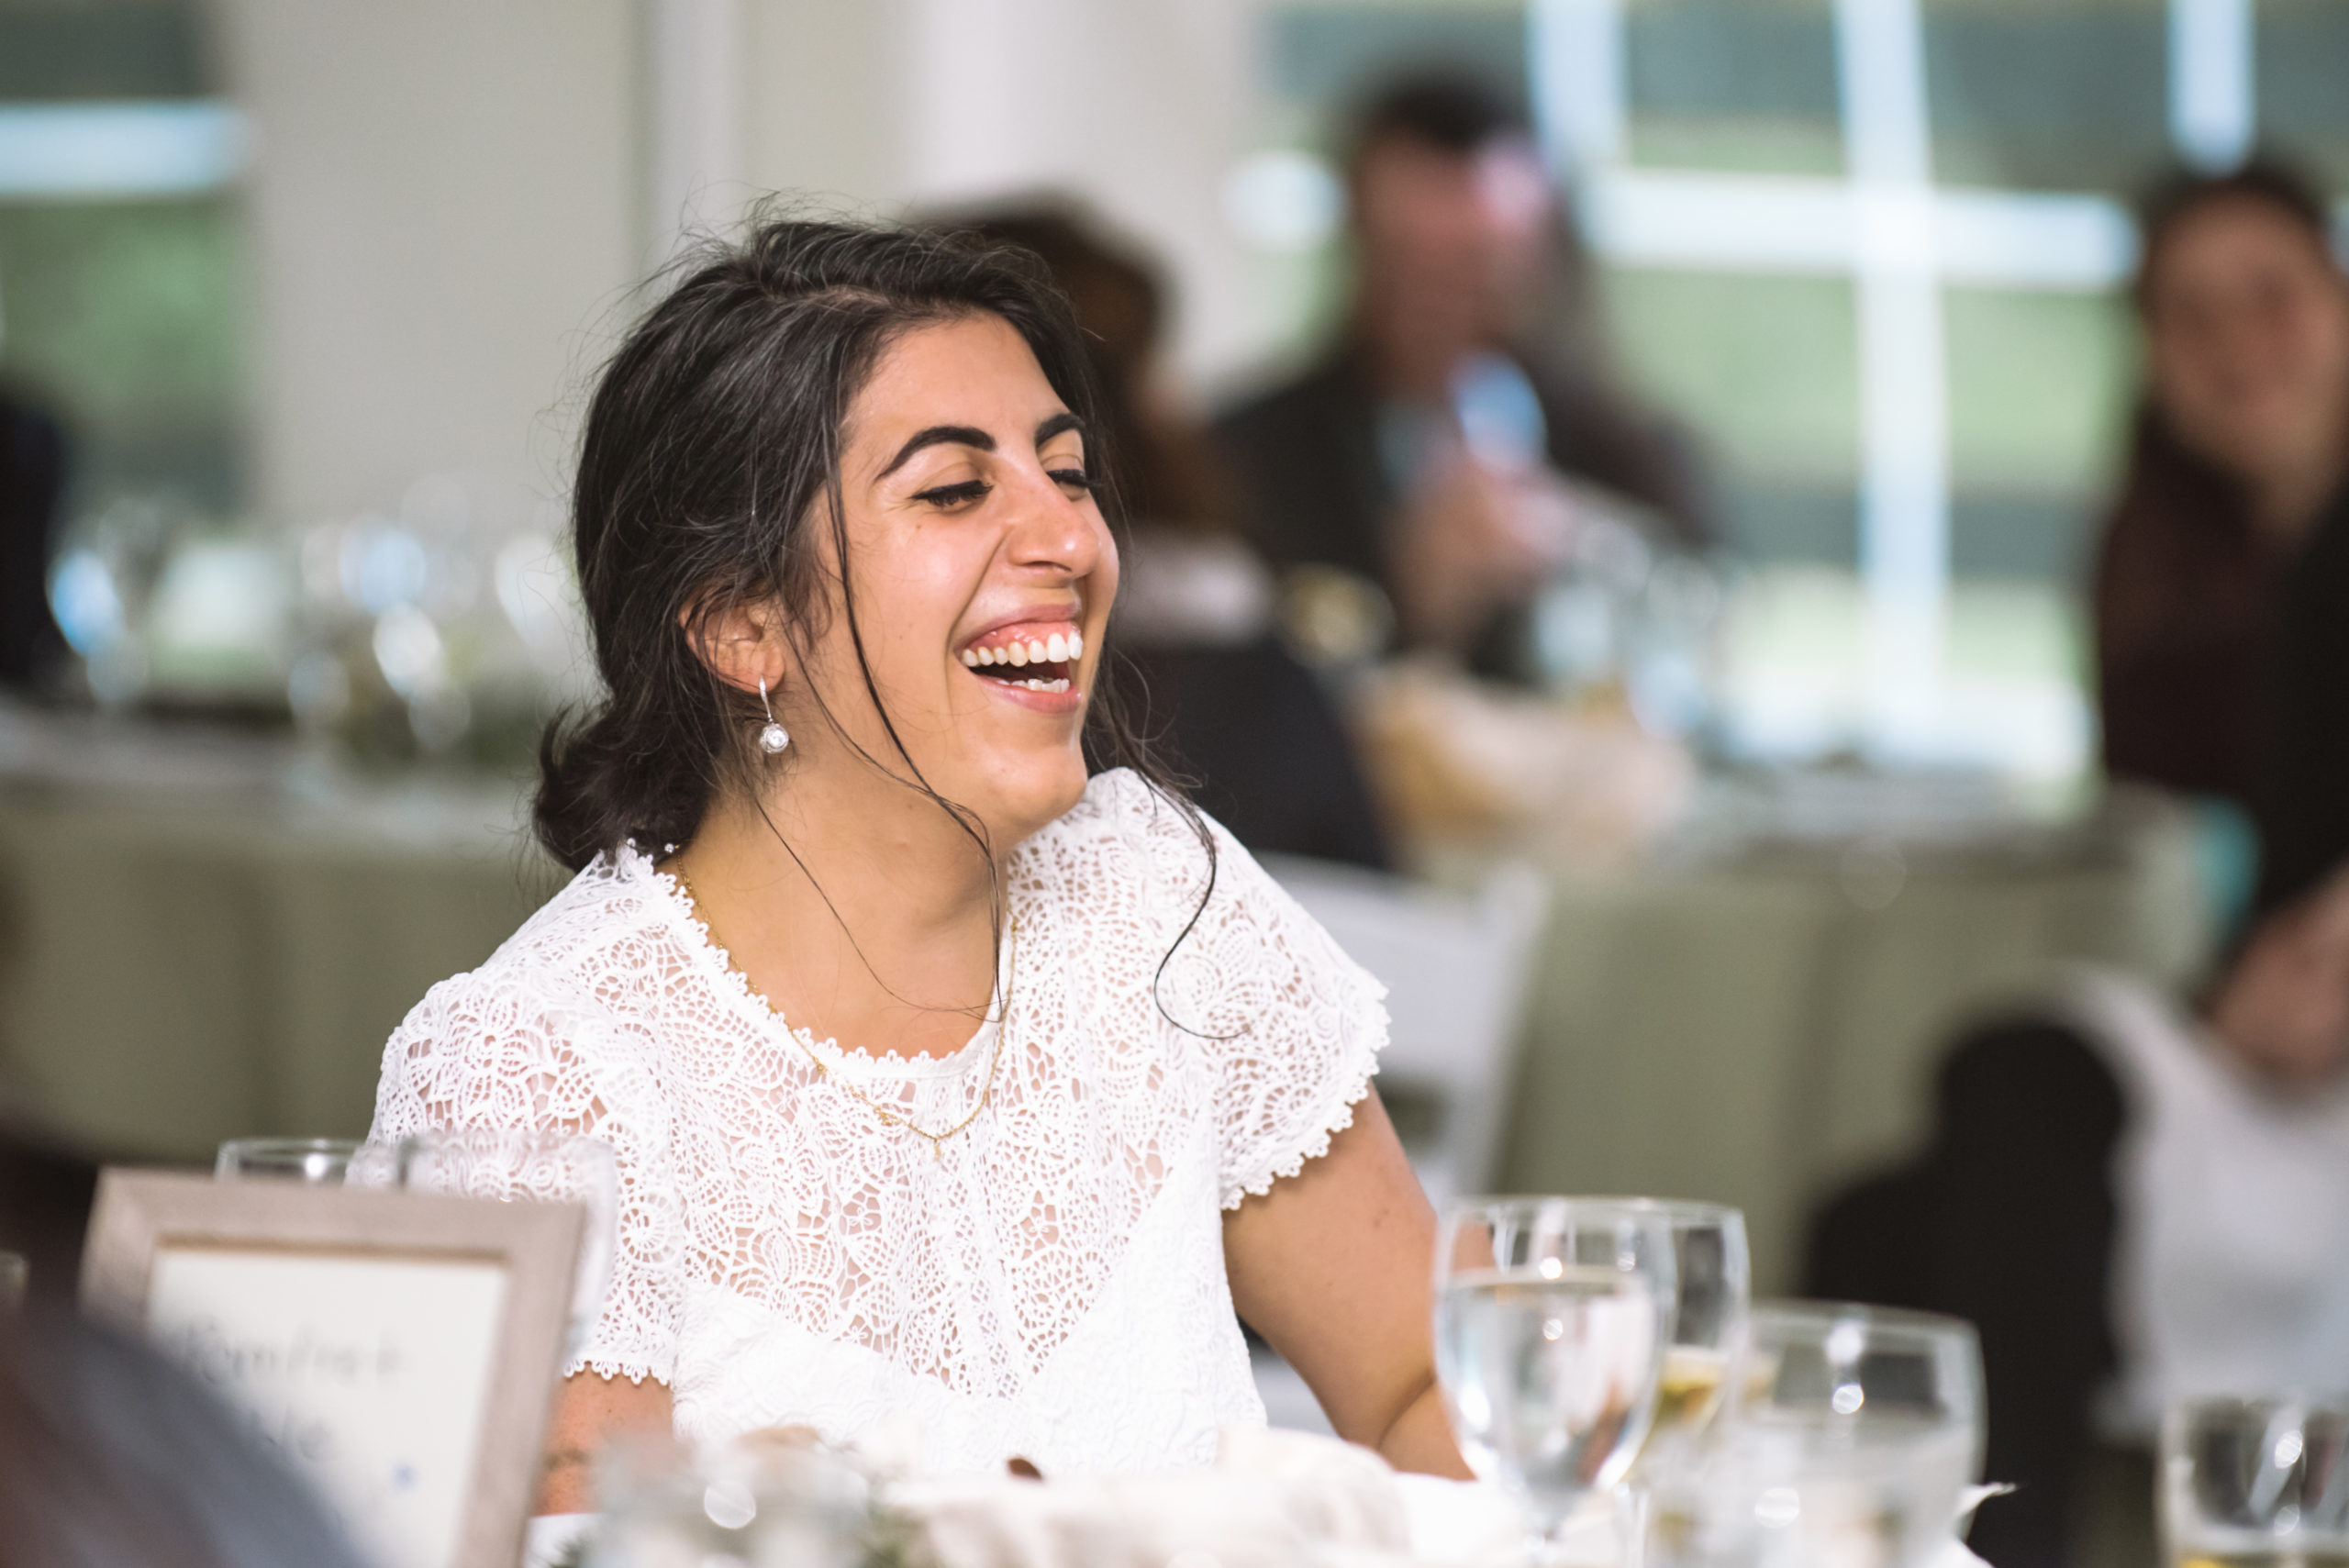 Bride hearing a speech during the white tent reception. She is open-mouthed laughing with her eyes closed. There are guests all around in the background.